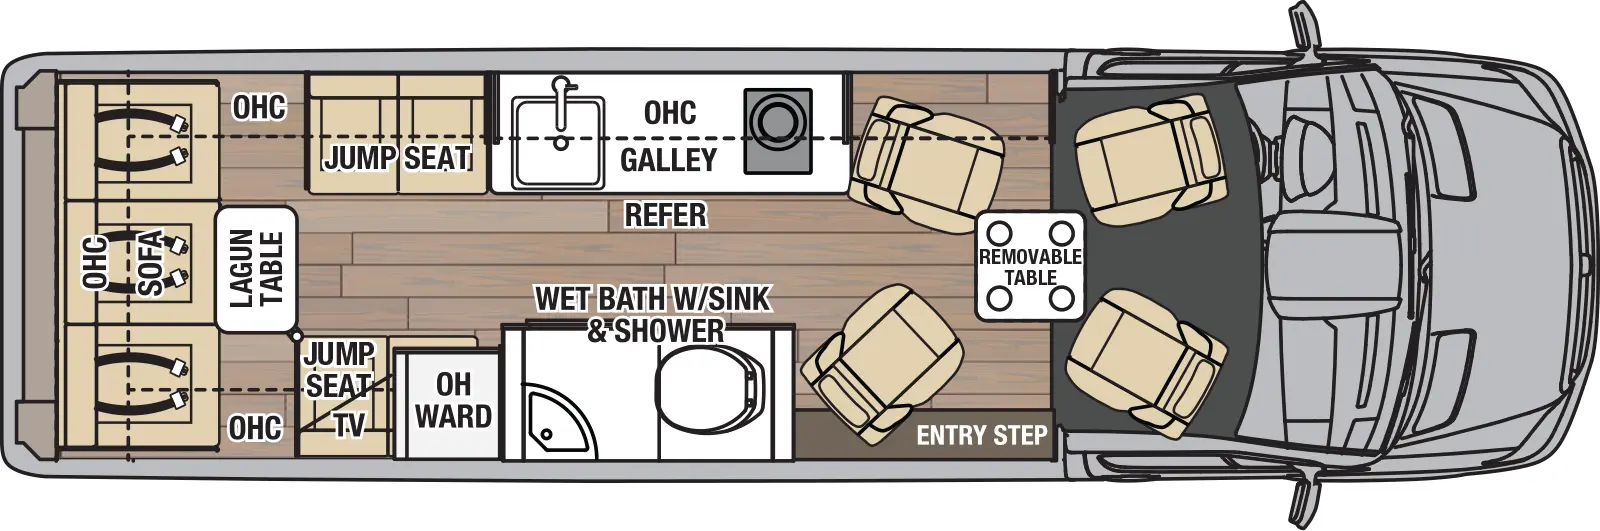 The Galleria 24Q has 0 slideouts and 1 entry door and rear doors. Interior layout from front to back; removable table; off door Galley kitchen with LP cooktop and single sink with overhead cabinets and refrigerator; off-door near entry step side wet bath with toilet, sink and shower; off door jump seat with overhead cabinets; door side wardrobe next to jump seat, TV and overhead cabinets; rear lagun table with rear sofa and overhead cabinets.